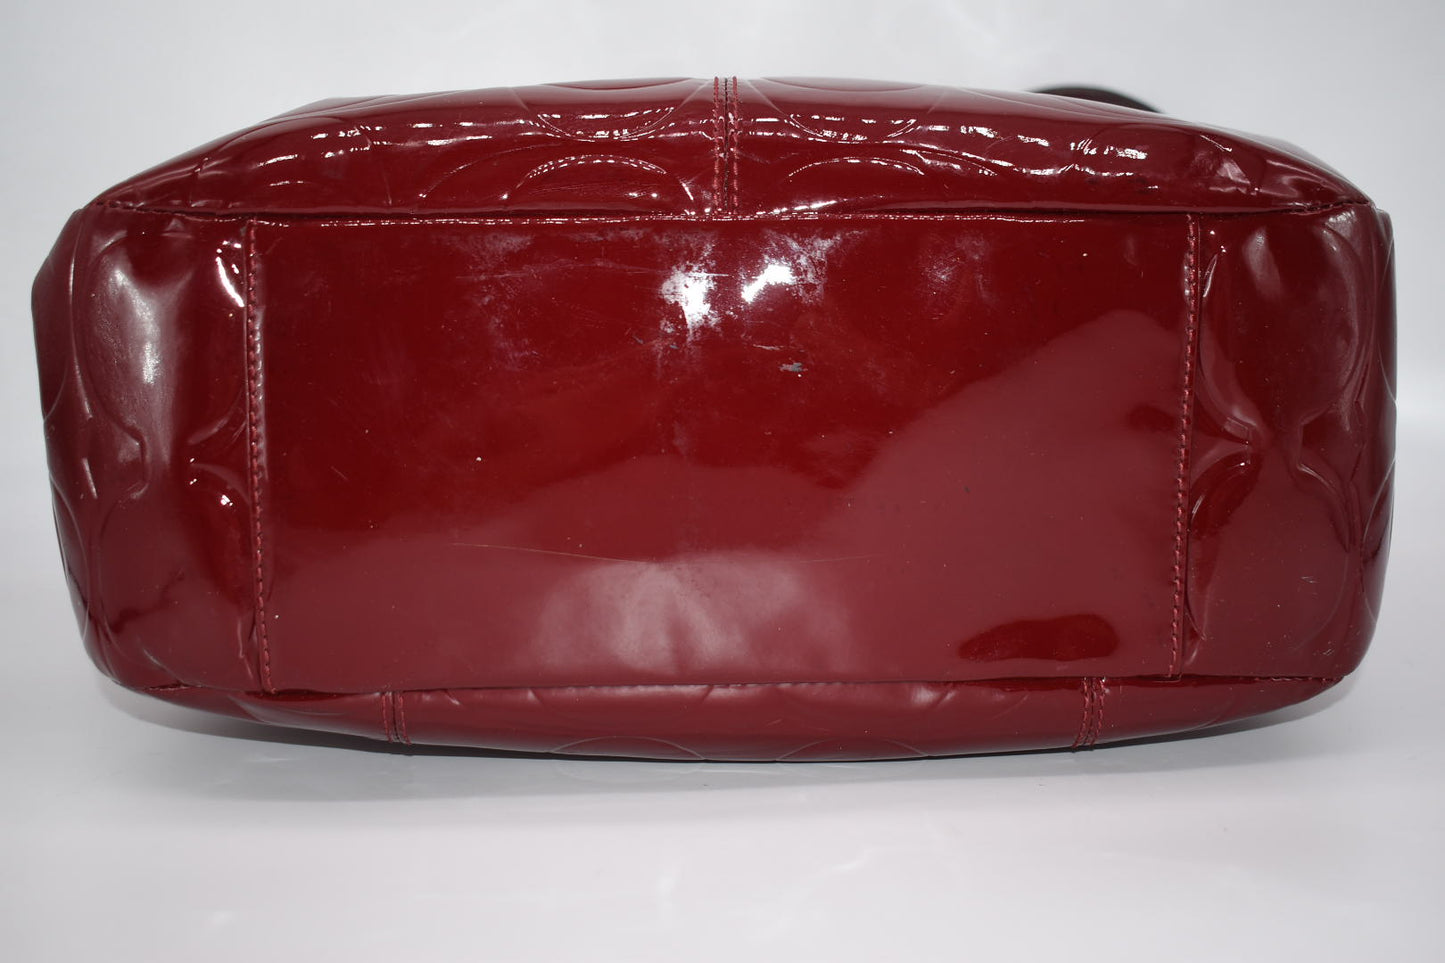 Coach Gallery Merlot Embossed Signature Patent Leather Tote Bag